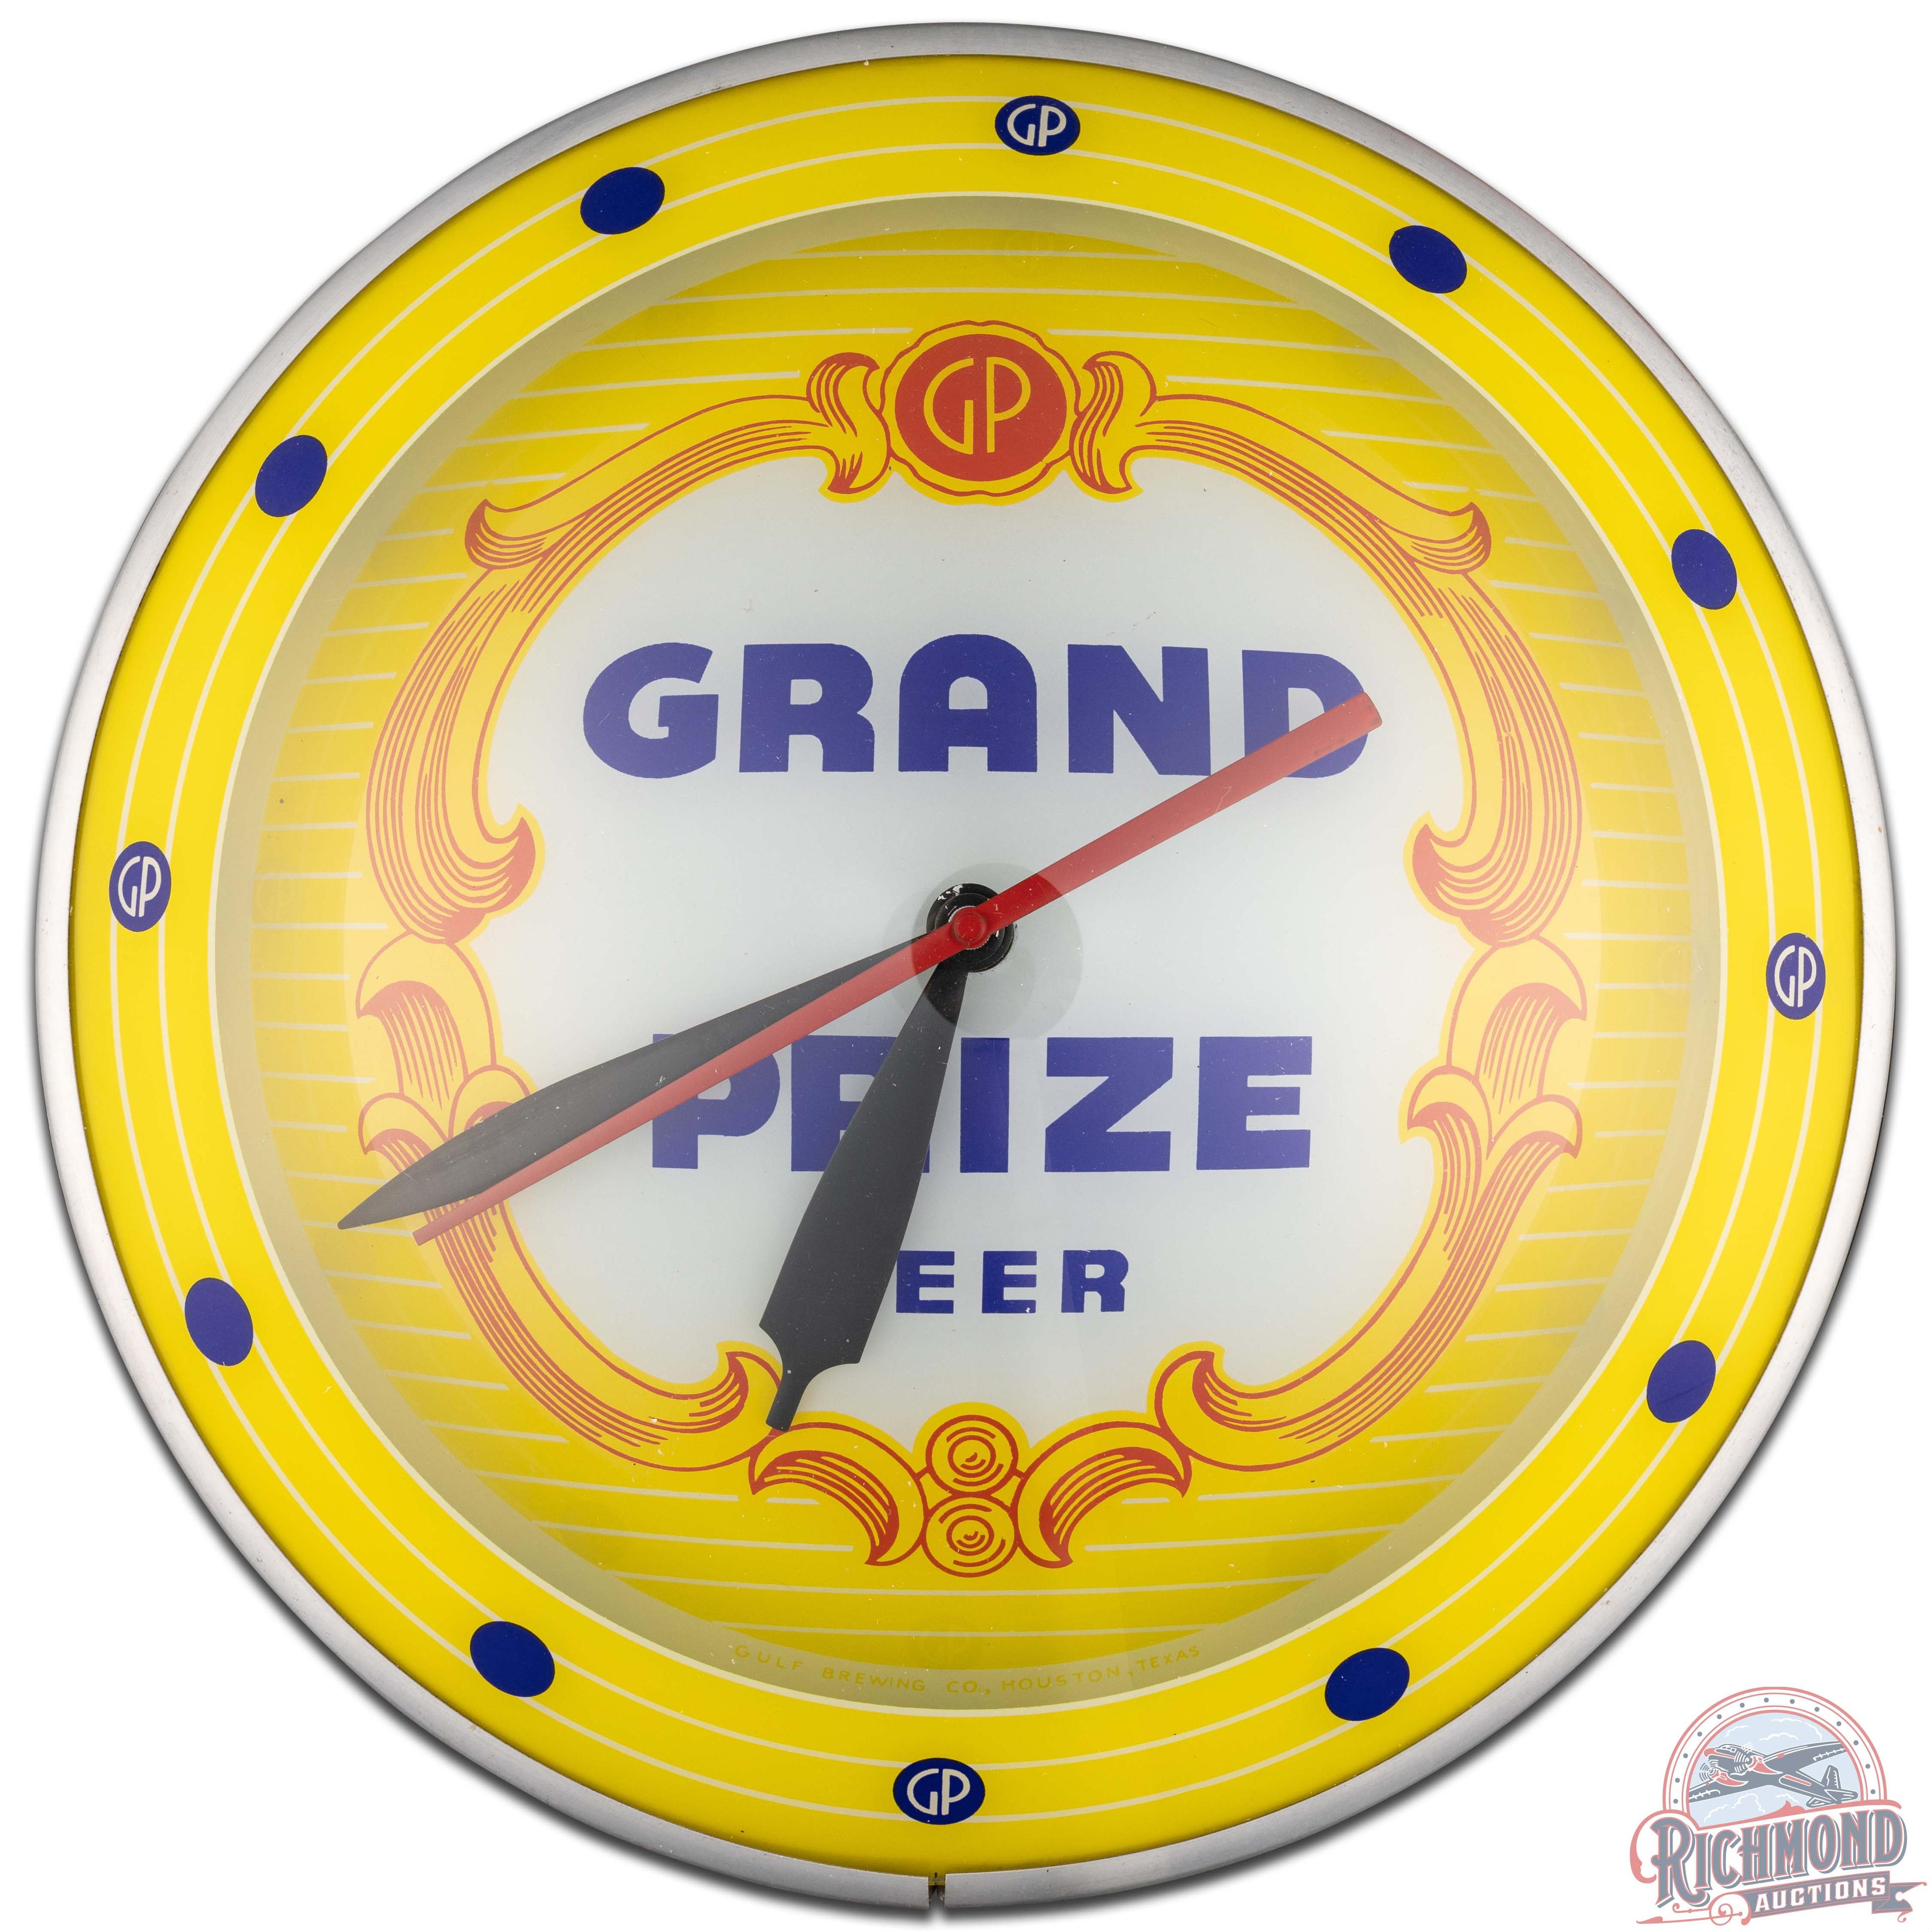 Grand Prize Beer Gulf Brewing Houston TX 15" Double Bubble Advertising Clock